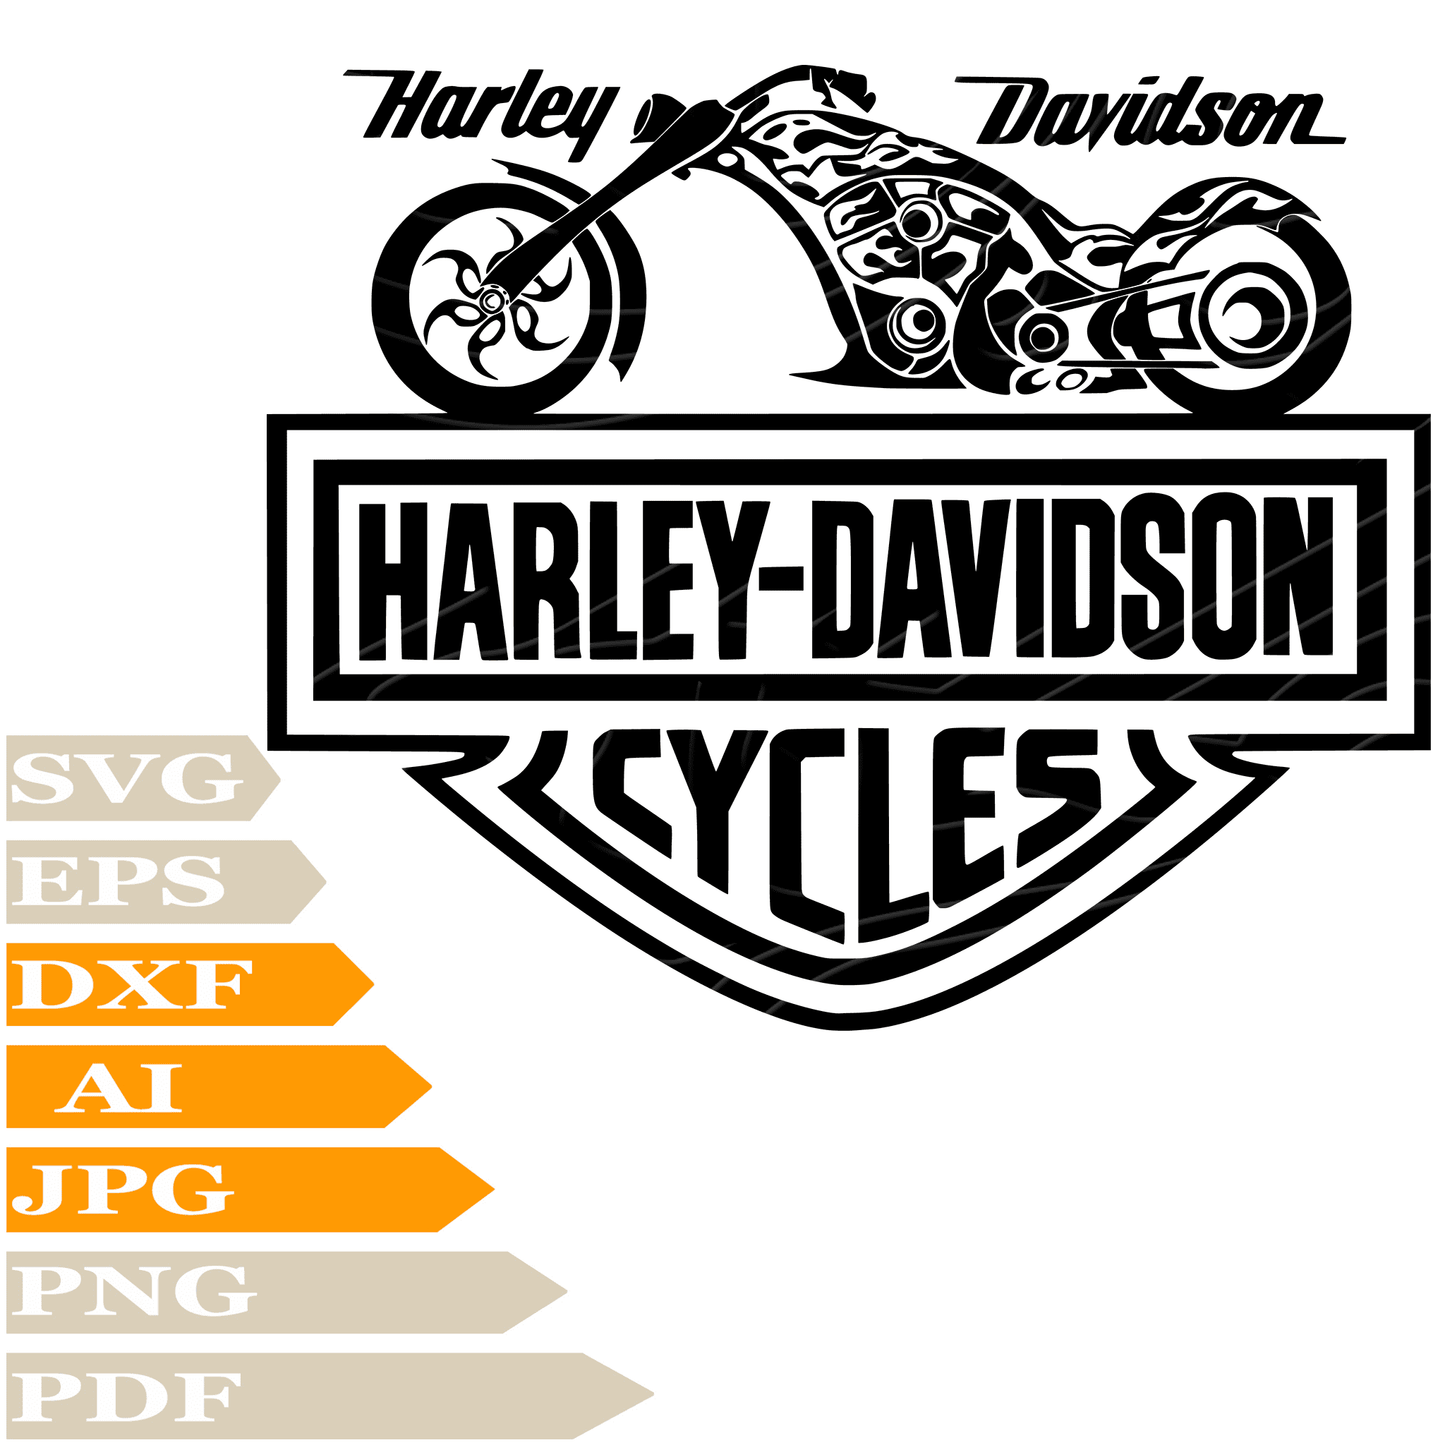 Motorcycle SVG, Harley Davidson Logo SVG File, Motorcycles Harley Davidson Logo SVG Design, Motorcycle Harley Vector Graphics, PNG, Cricut, Image Cut, Clipart,  For Tattoo, Cut File, Silhouette